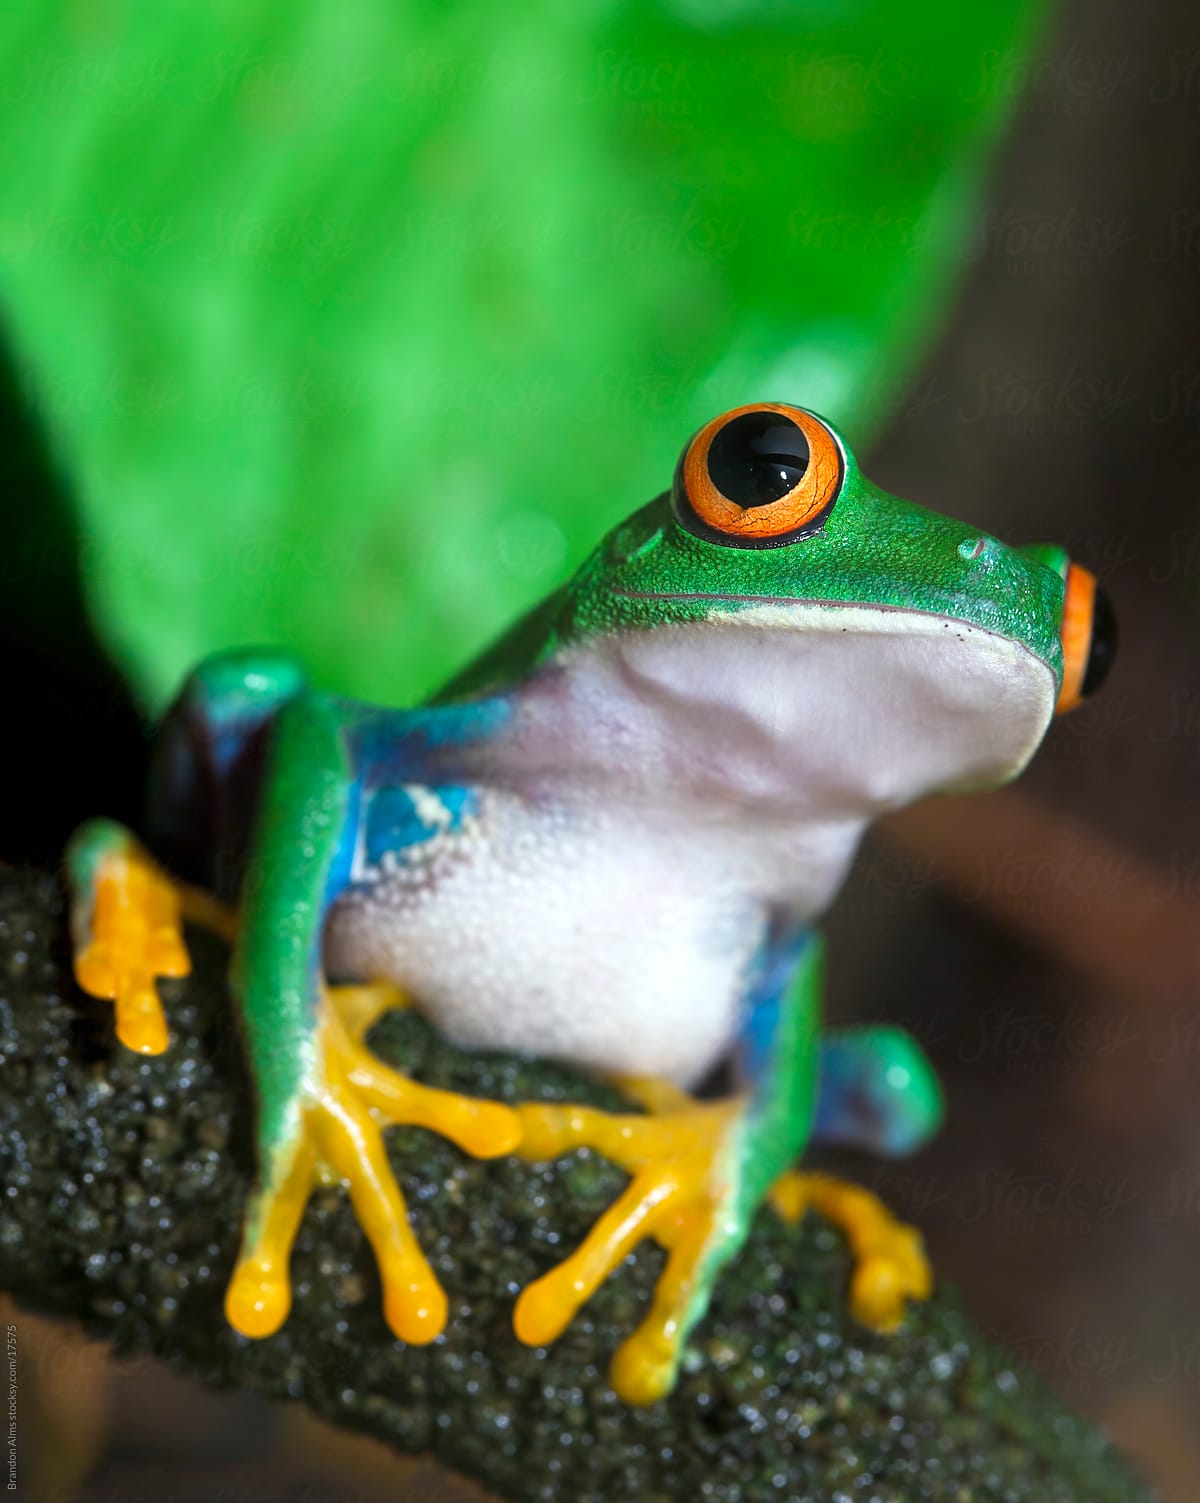 Red Eyed Tree Frog on a Vine in the Rainforest